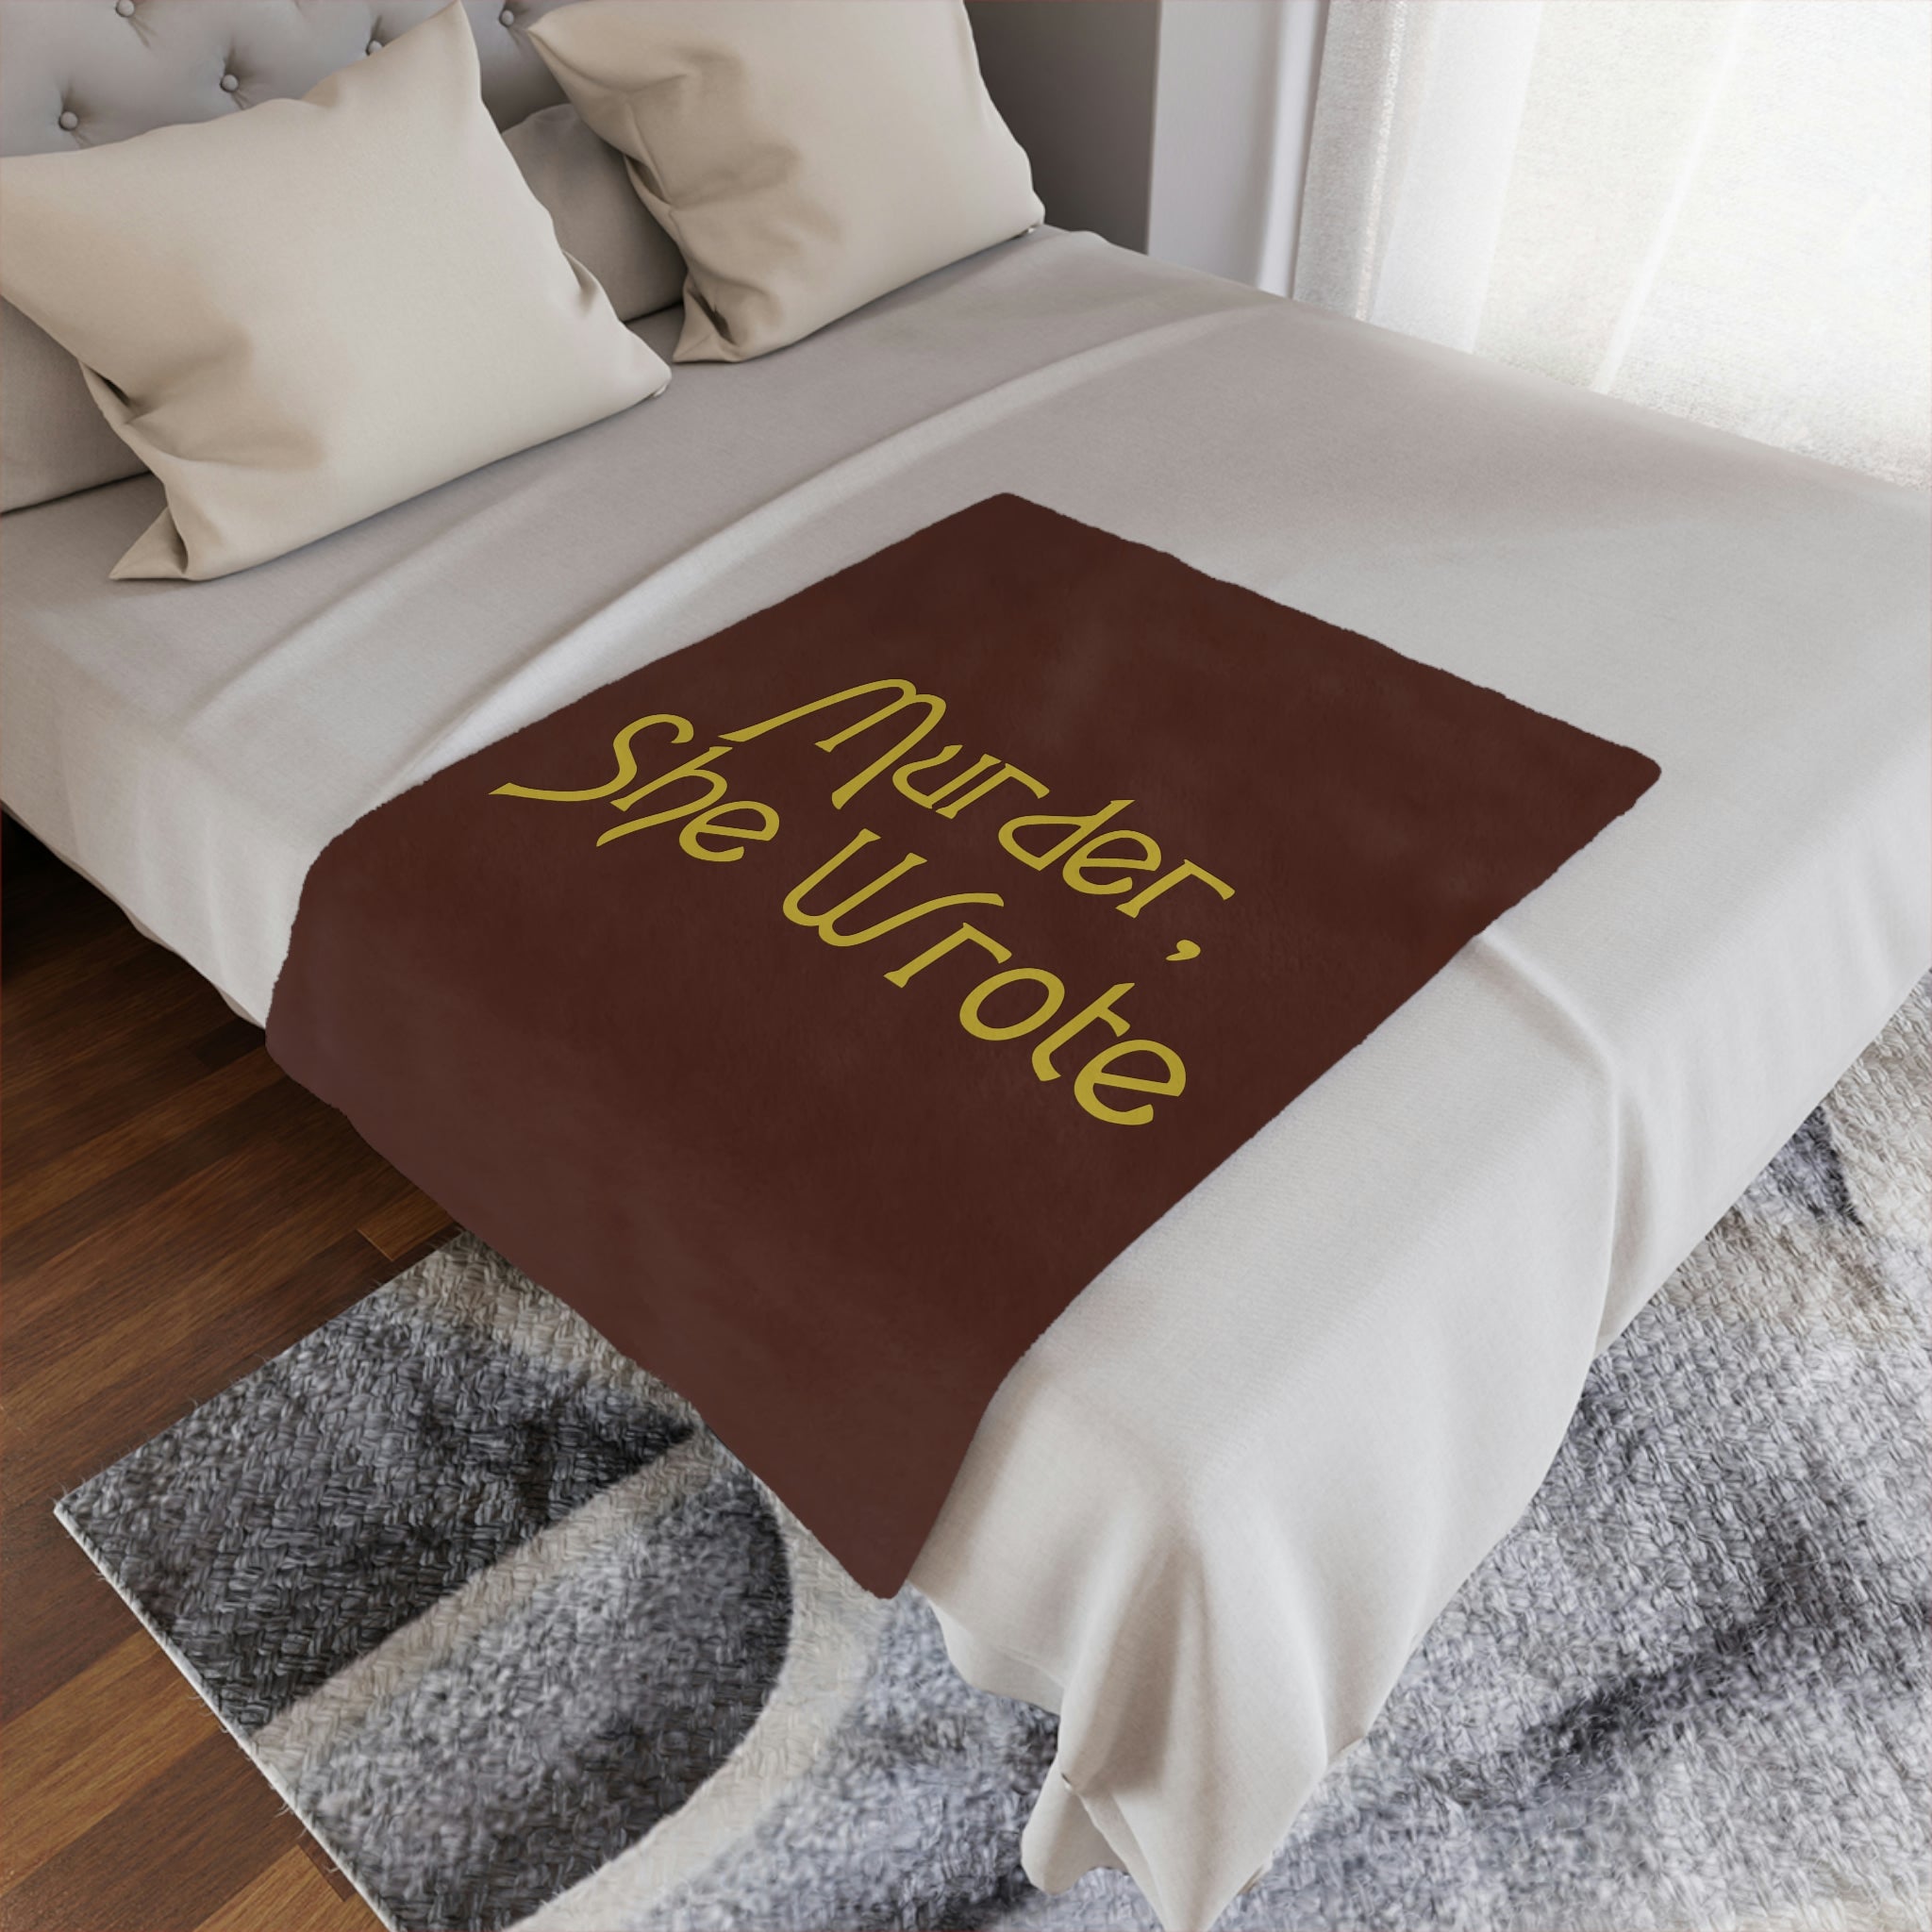 Murder She Wrote Blanket small size 30"x40"